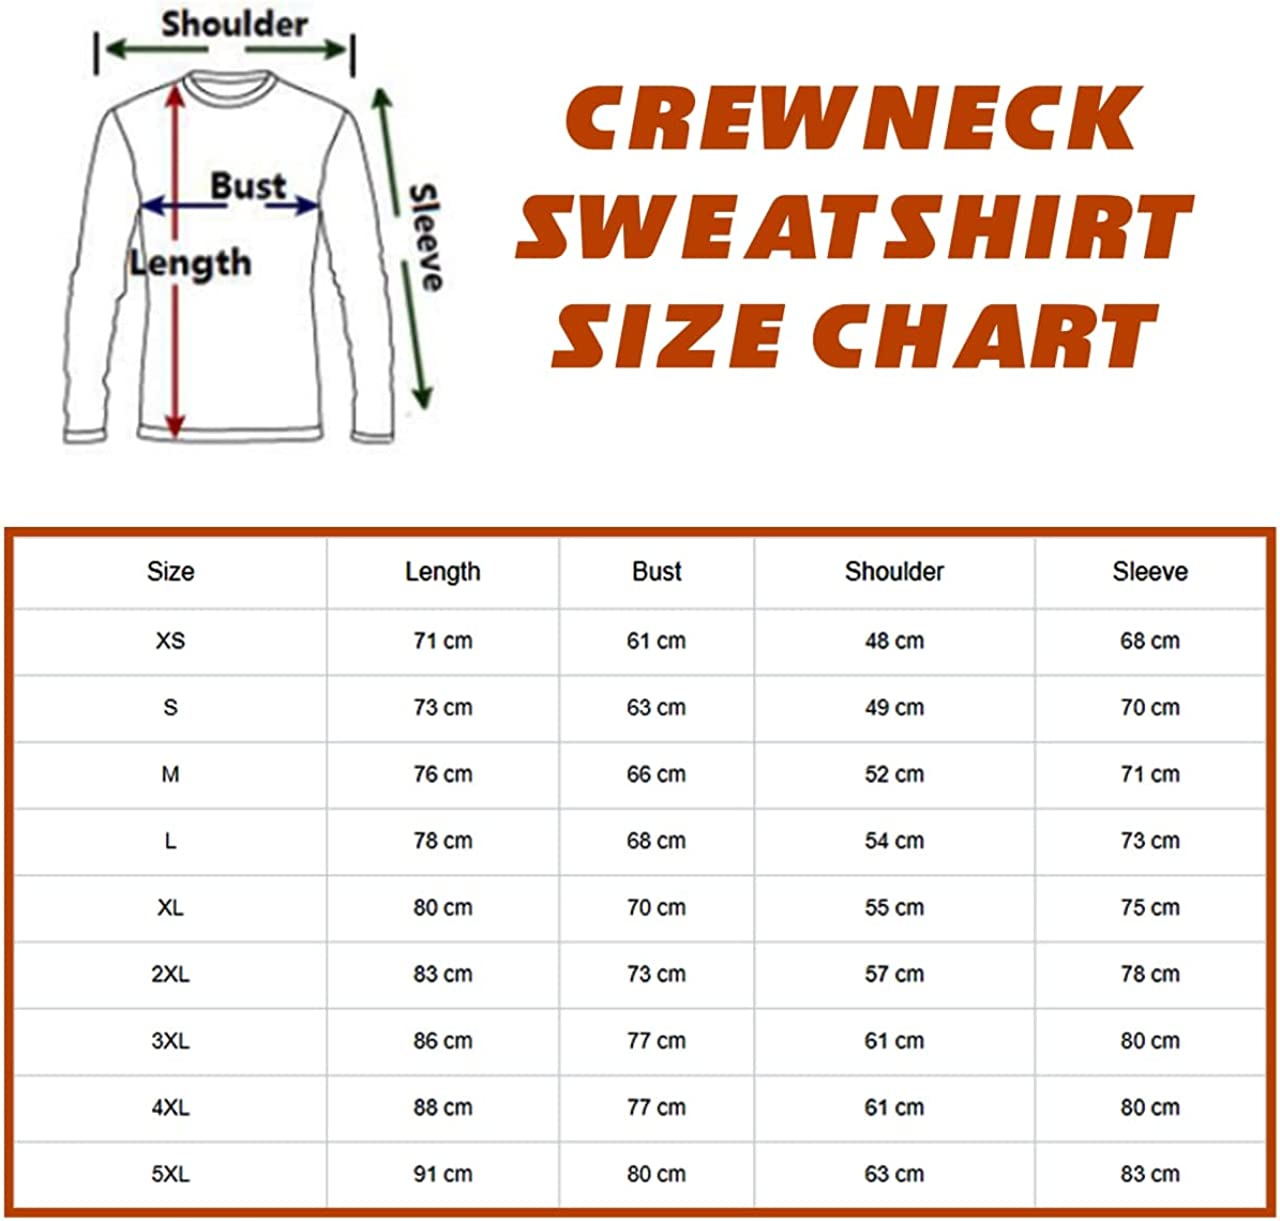 Customizable Trucker Shirts with 3D Printing: Perfect Gift for Trucker Enthusiasts! Choose from Hawaiian Shirts, Sweatshirts, Hoodies, and More in Multicolor Over Printing. – JOT1446